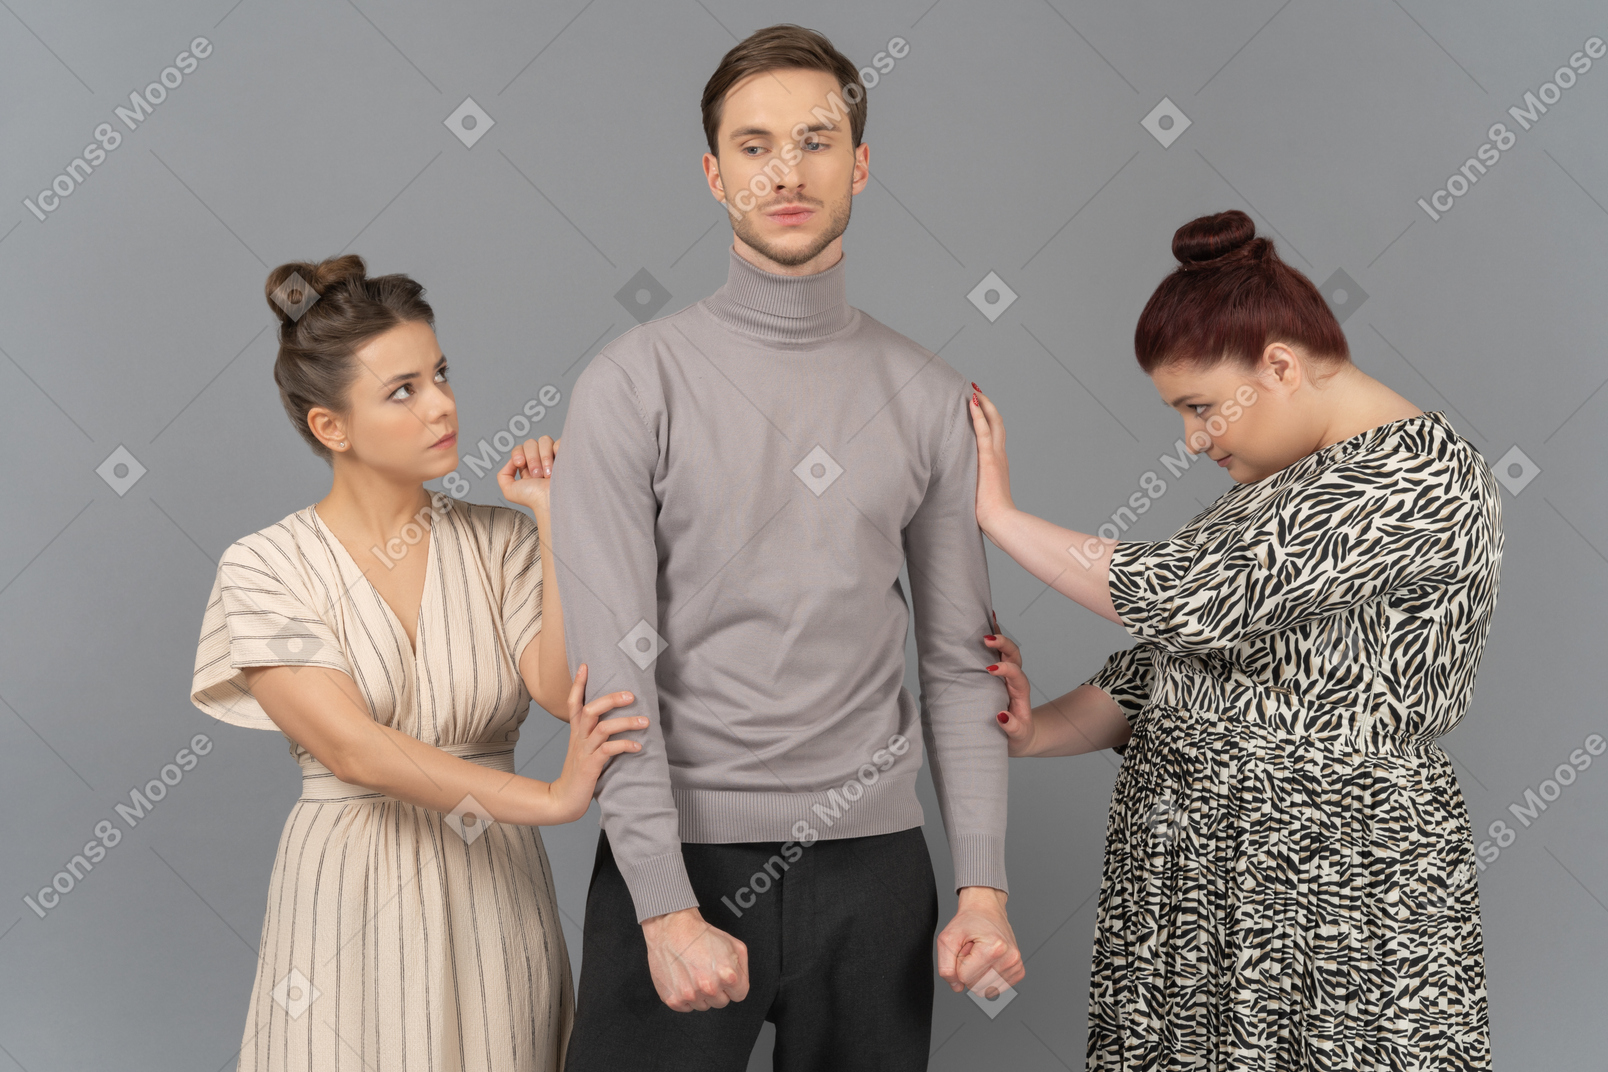 Young man showing his anger to two frightened women